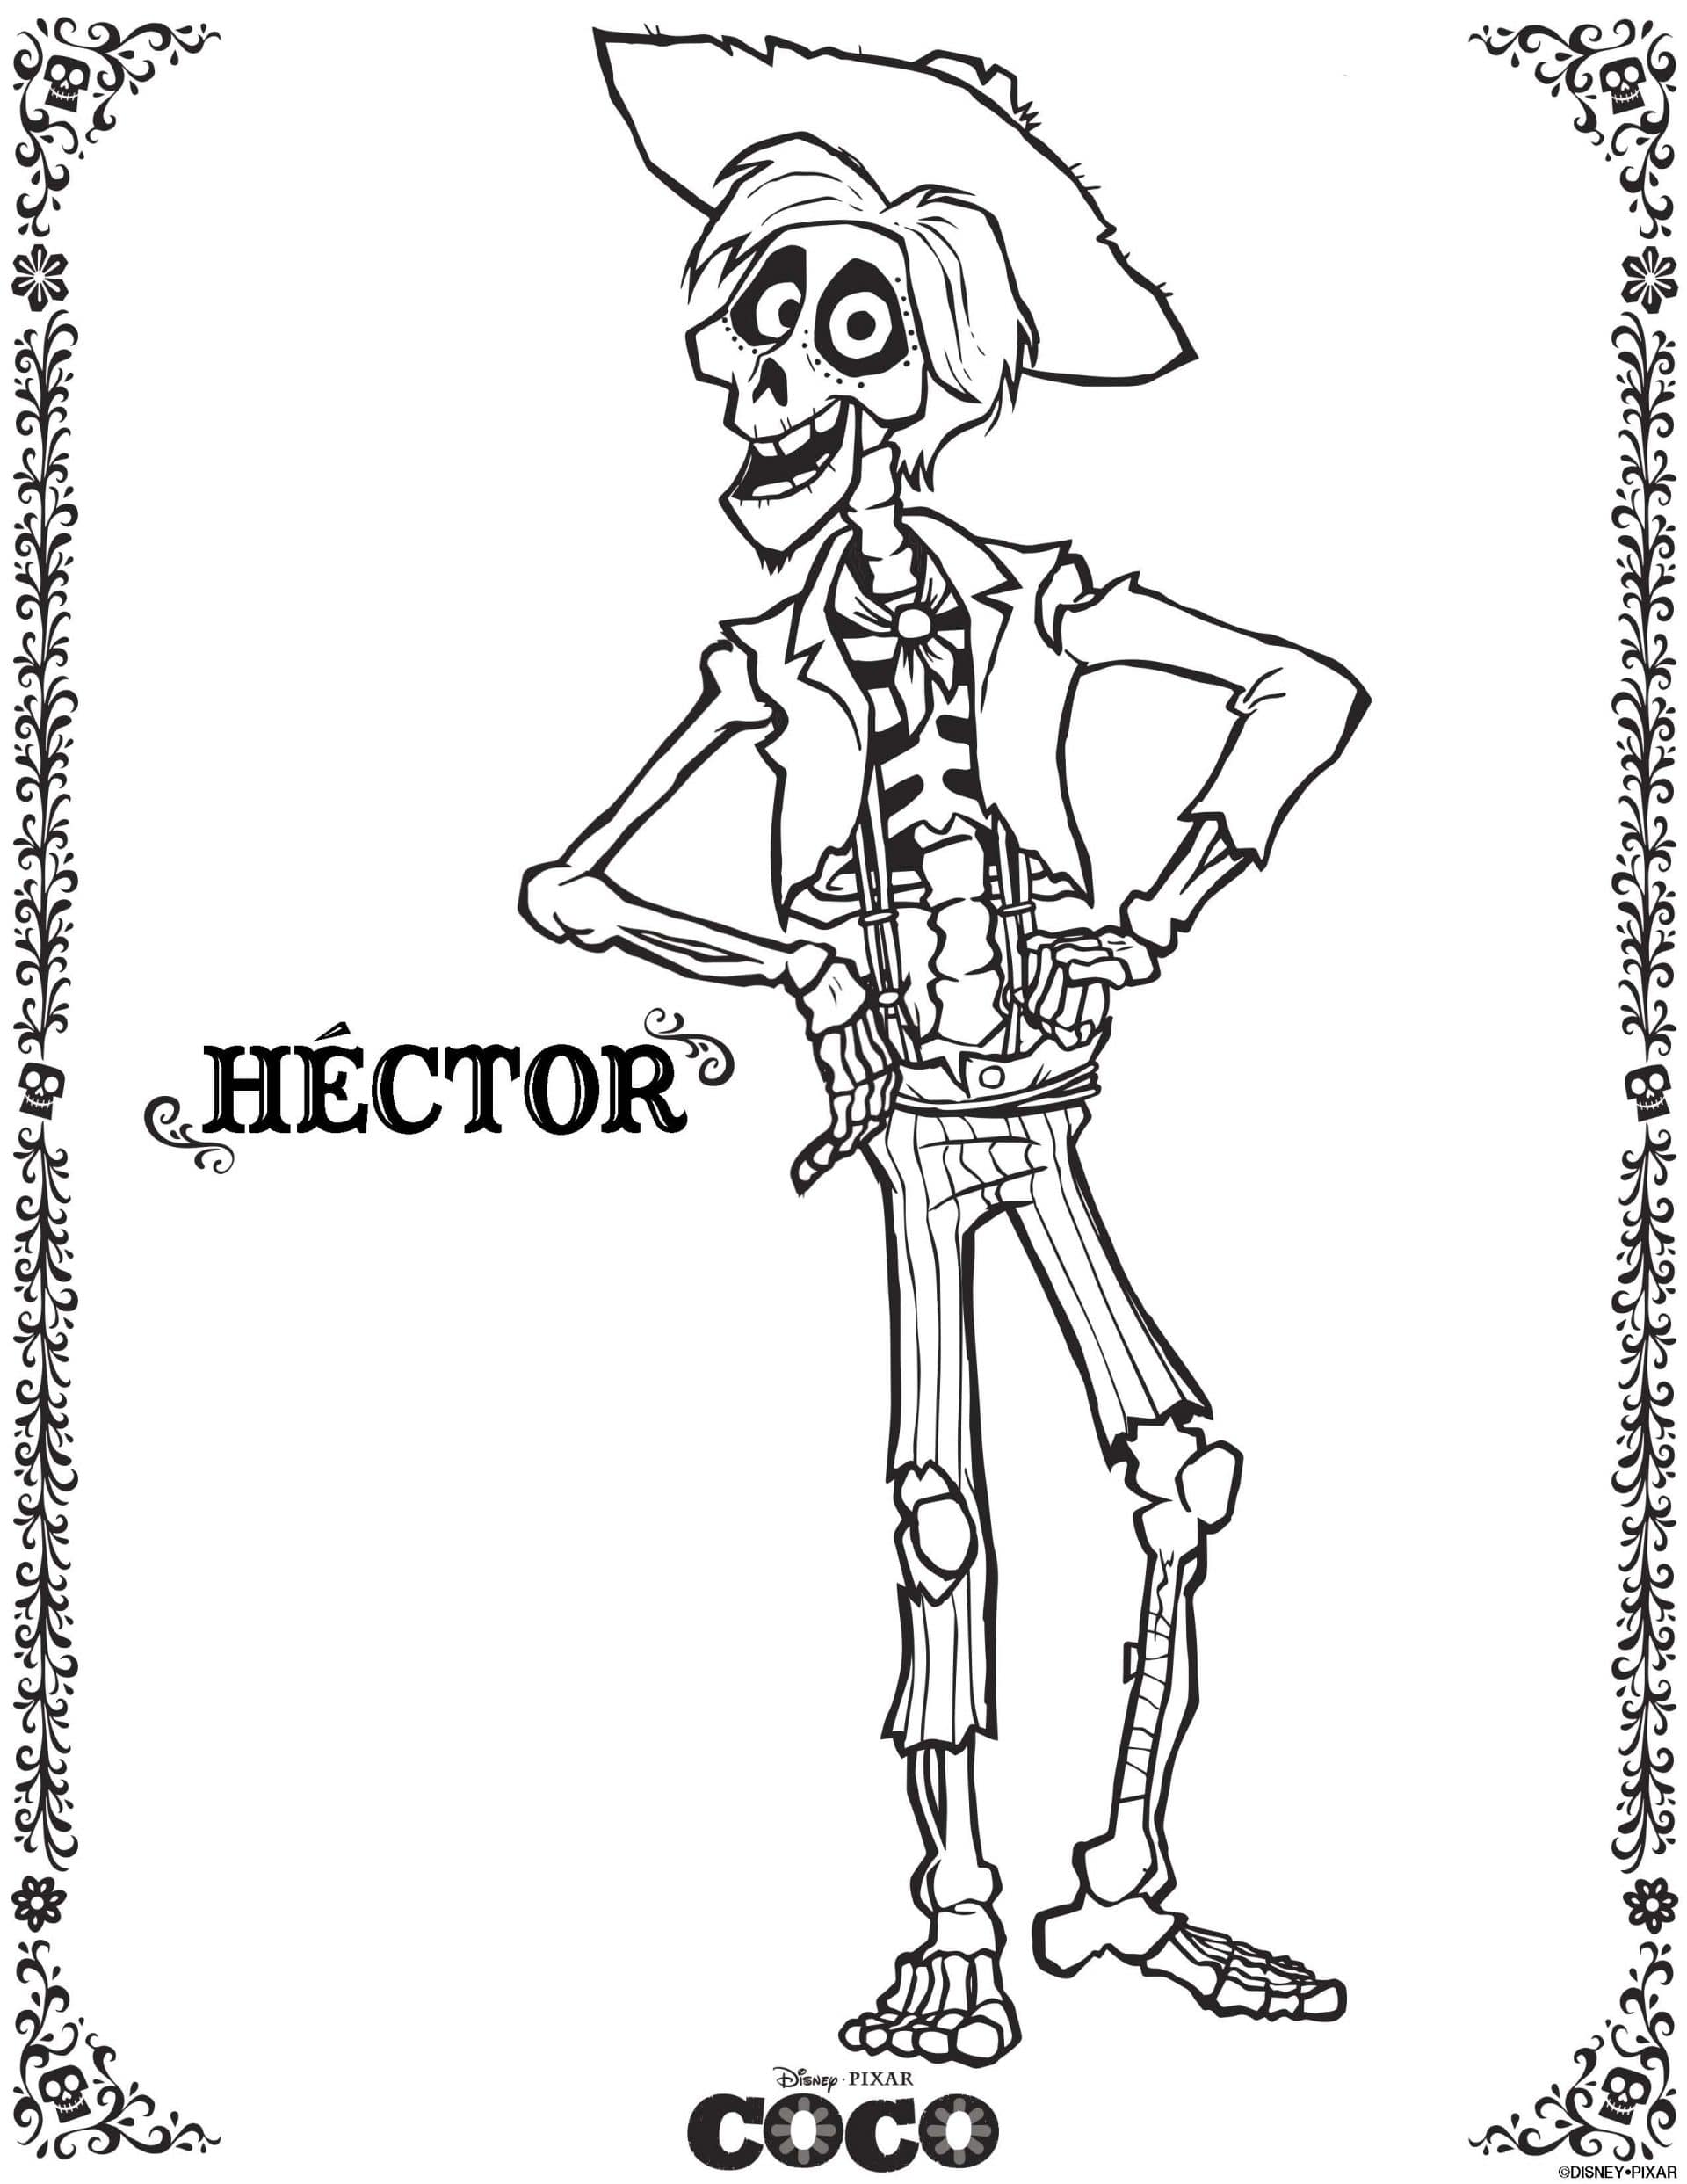 Coco Coloring Pages - Hector